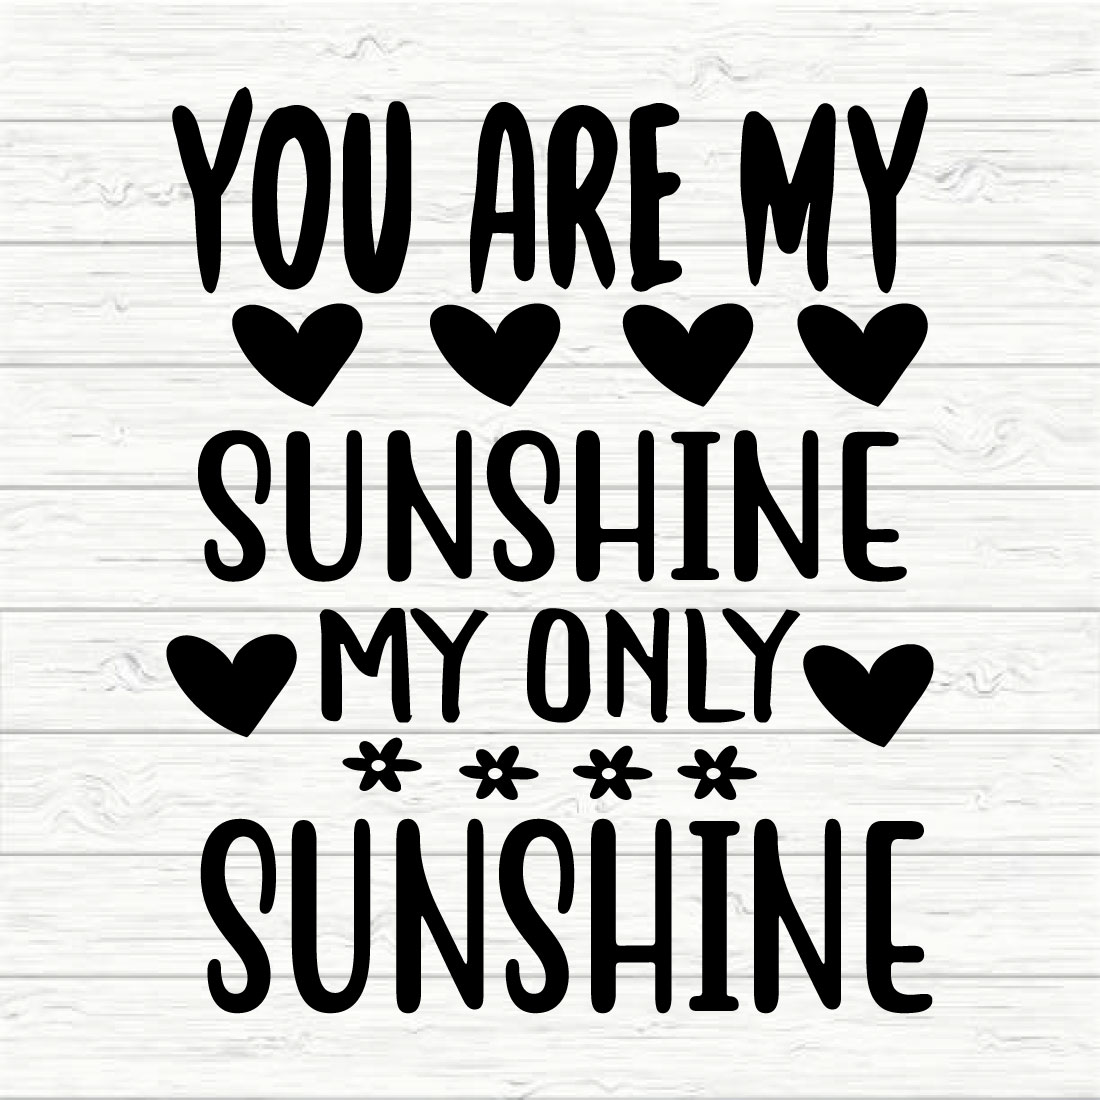 You Are My Sunshine My Only Sunshine cover image.